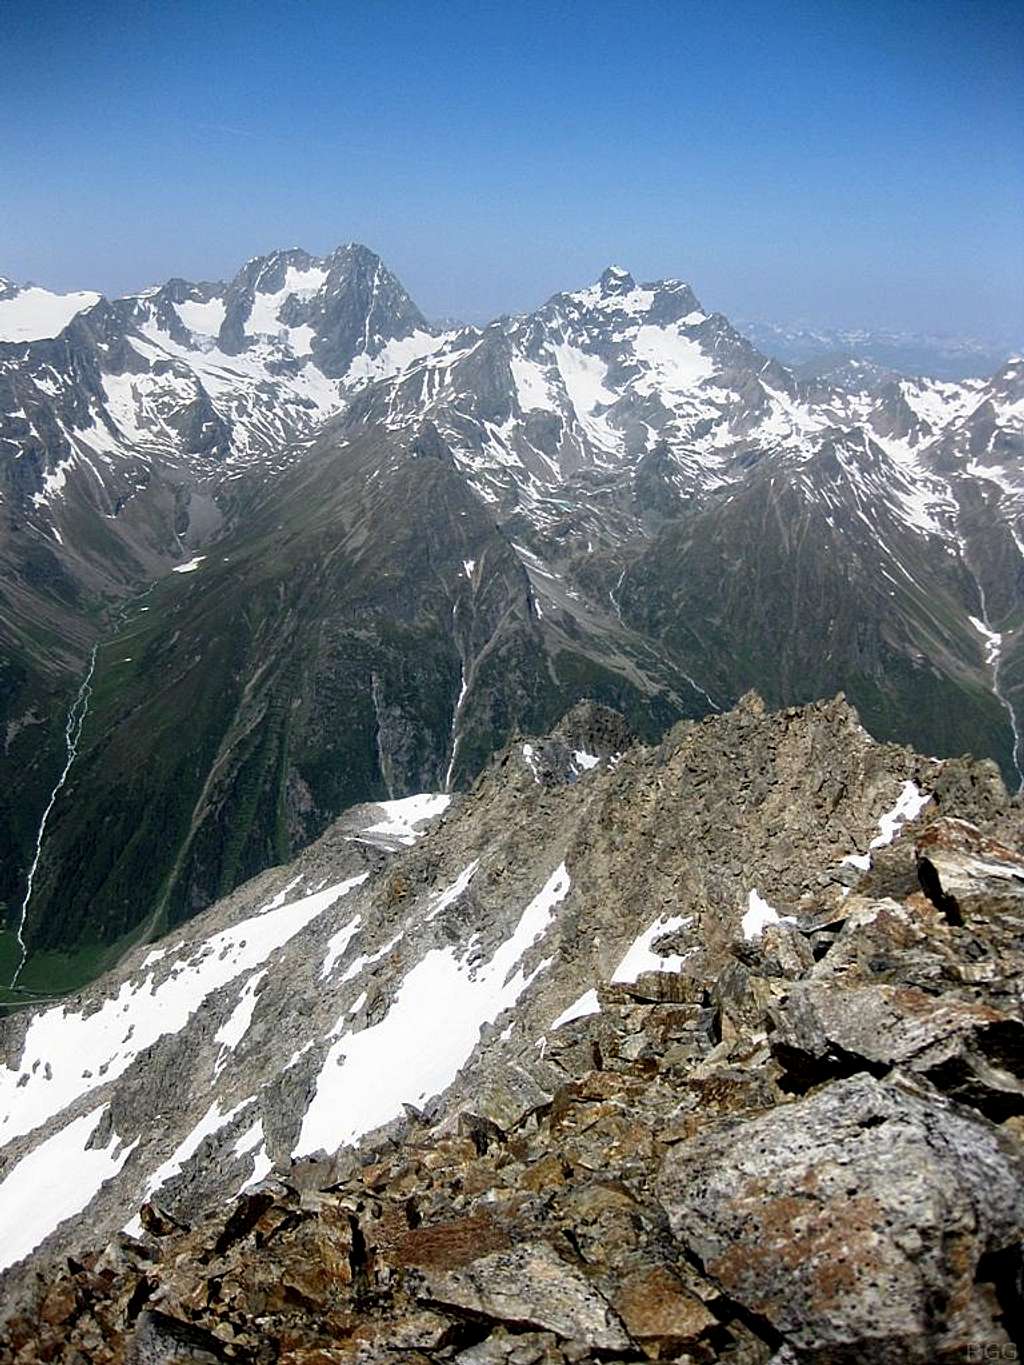 Watzespitze (3532m) and Verpeilspitze (3423m) from the east